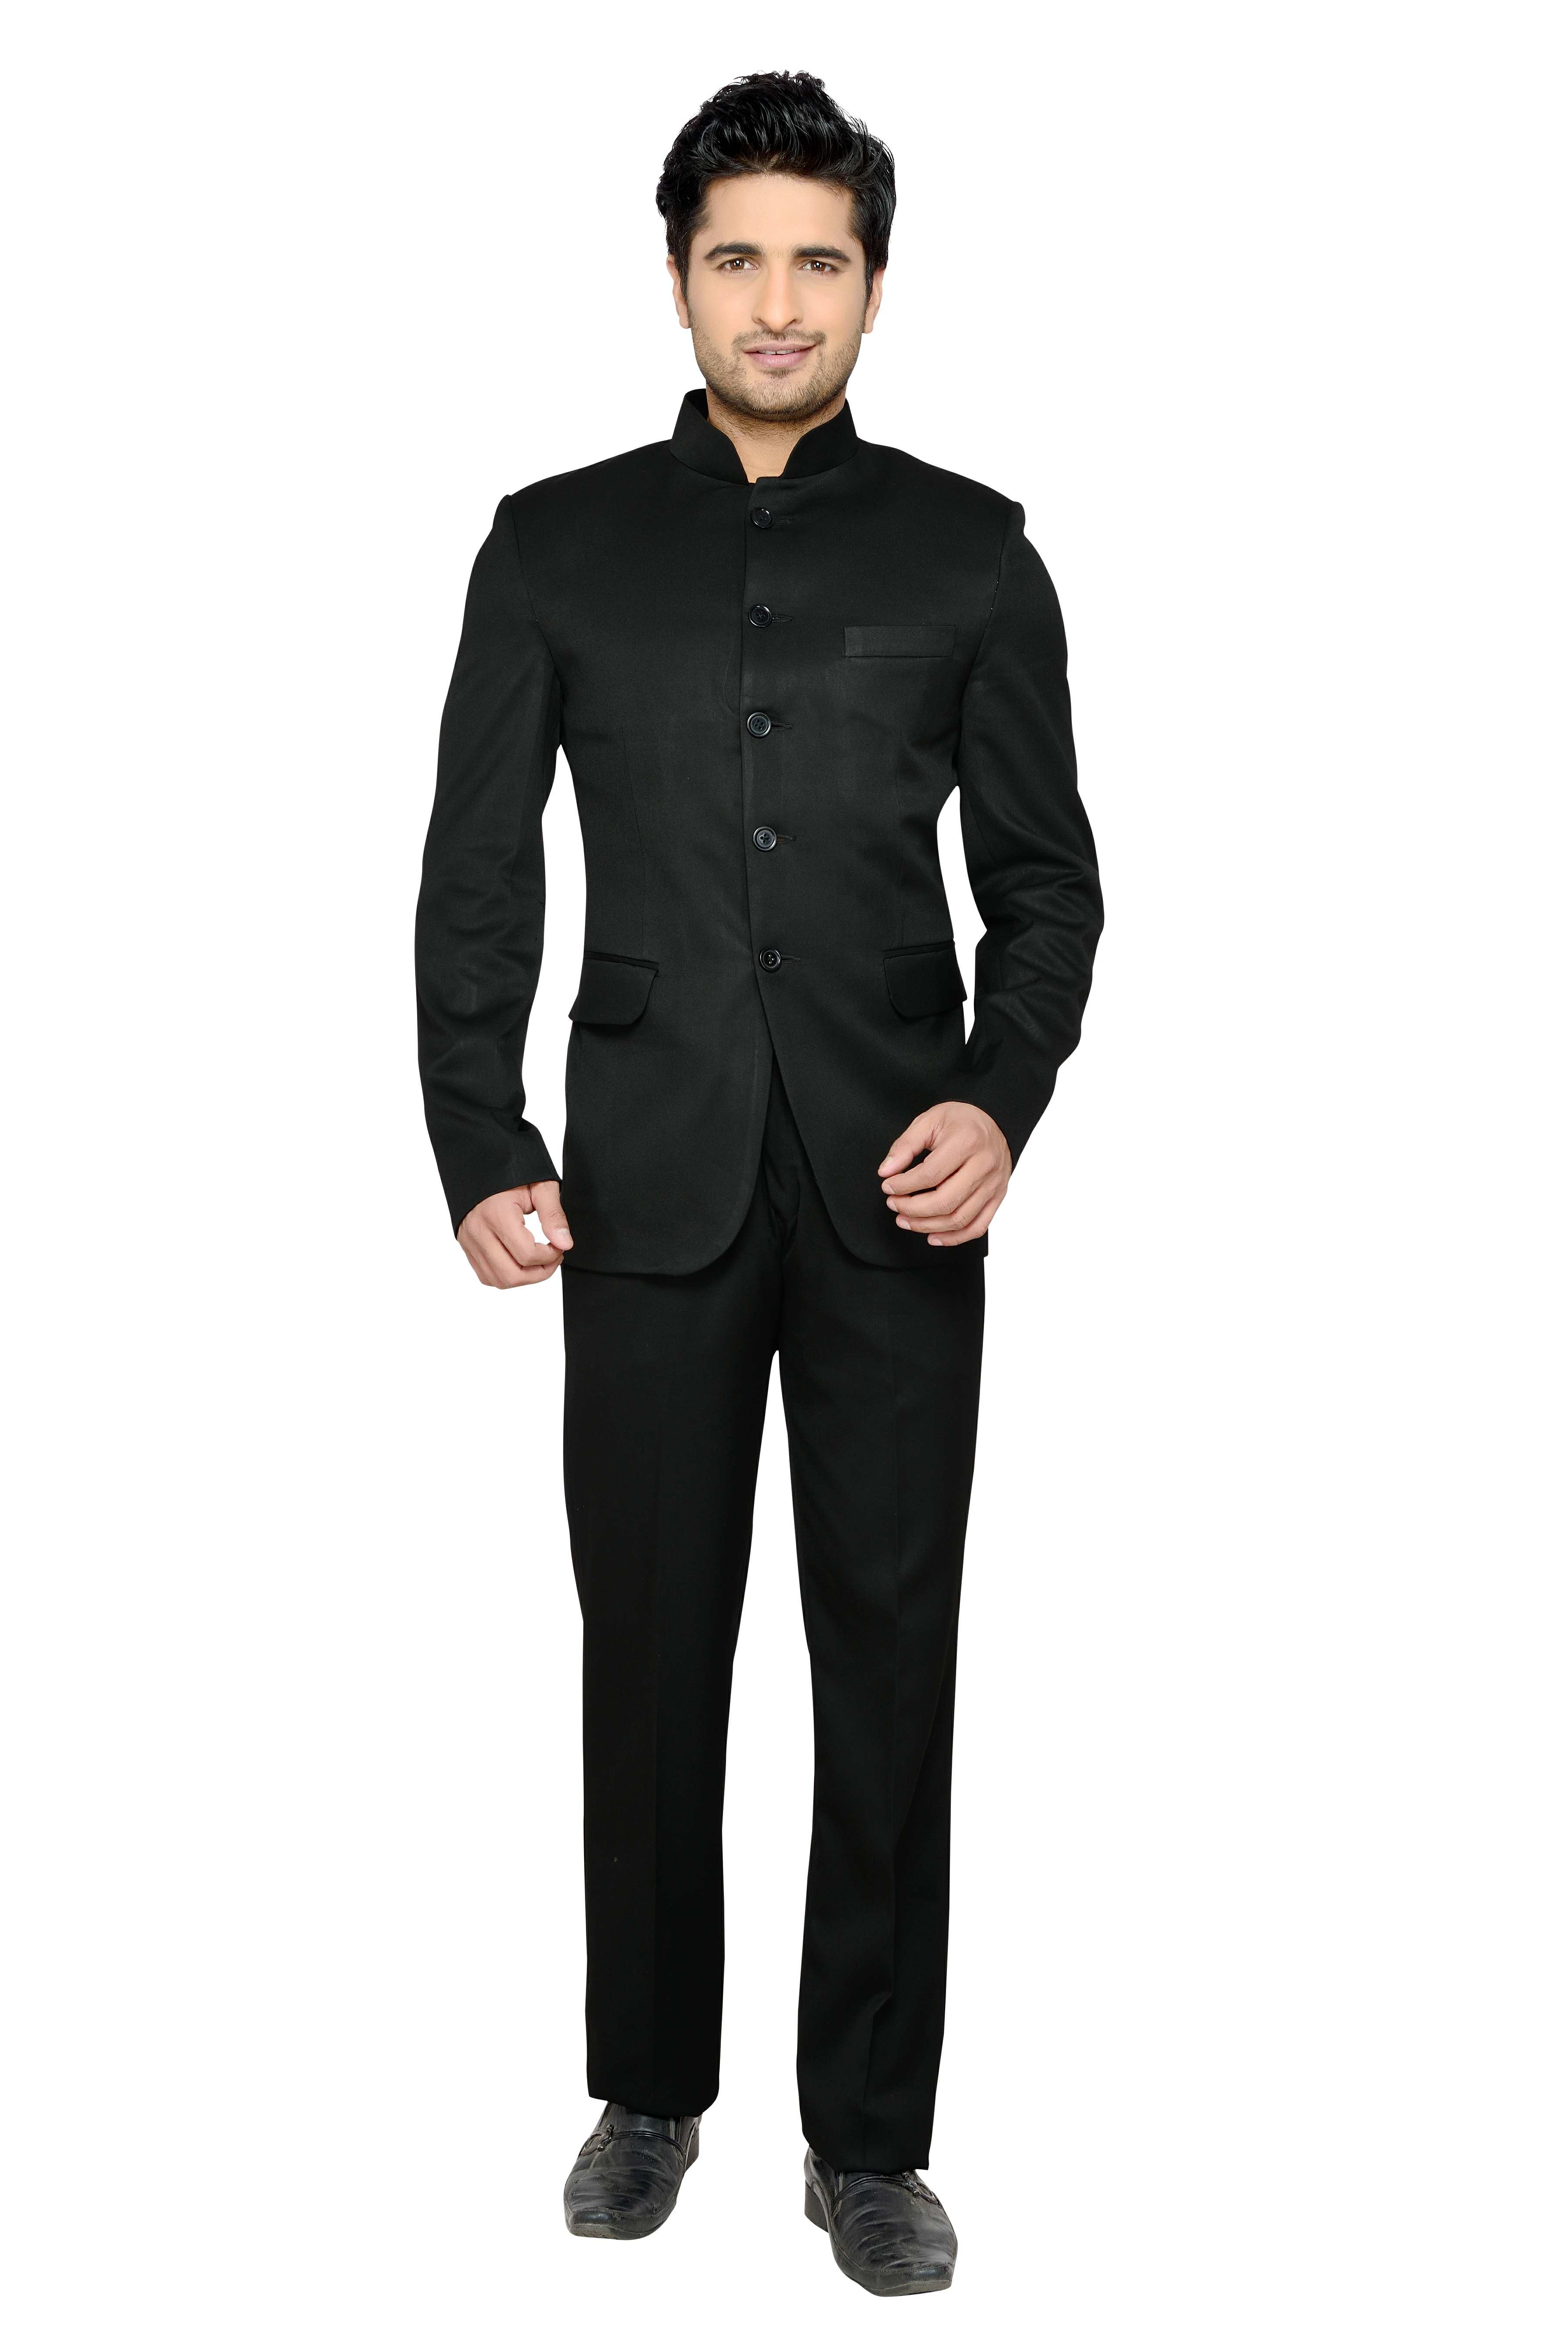 Buy Hangup Single Breasted Solid Mens Suit Online @ ₹2100 from ShopClues